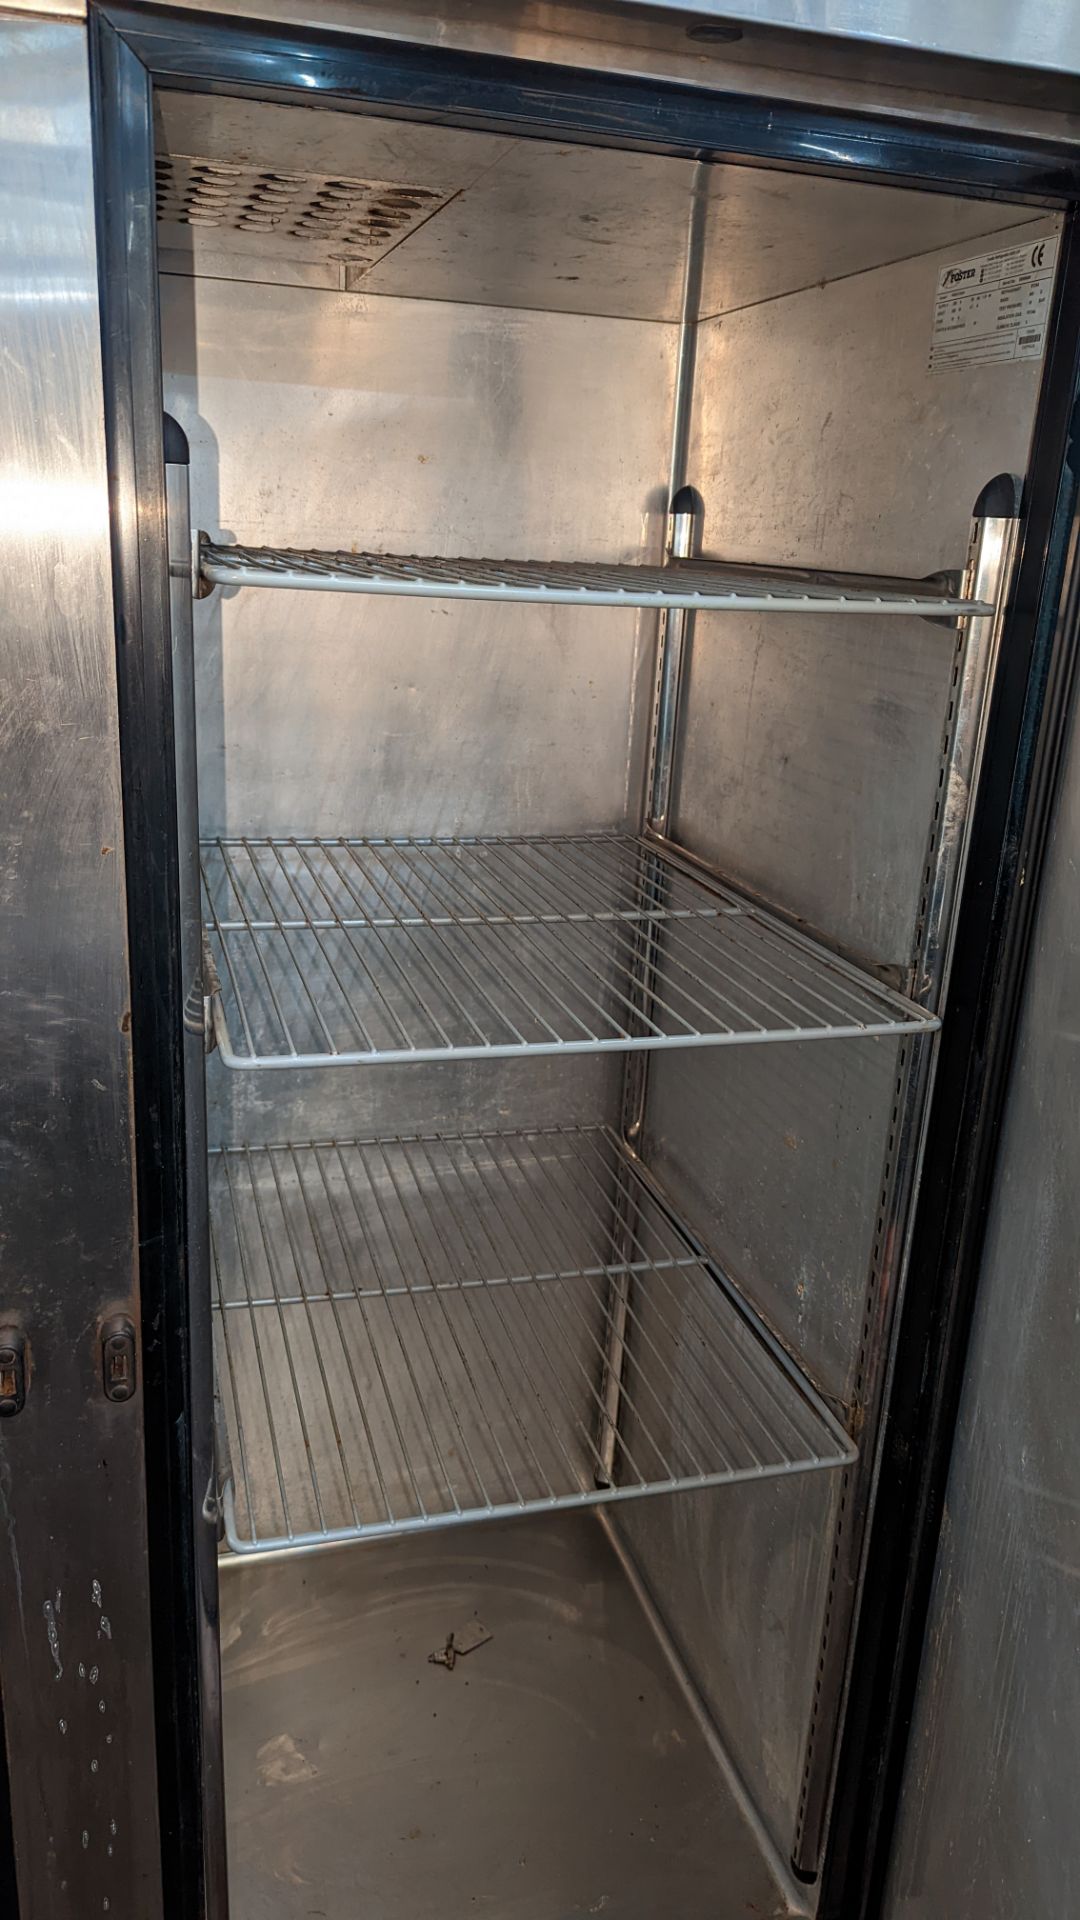 Foster large stainless steel twin door commercial fridge - Image 5 of 7